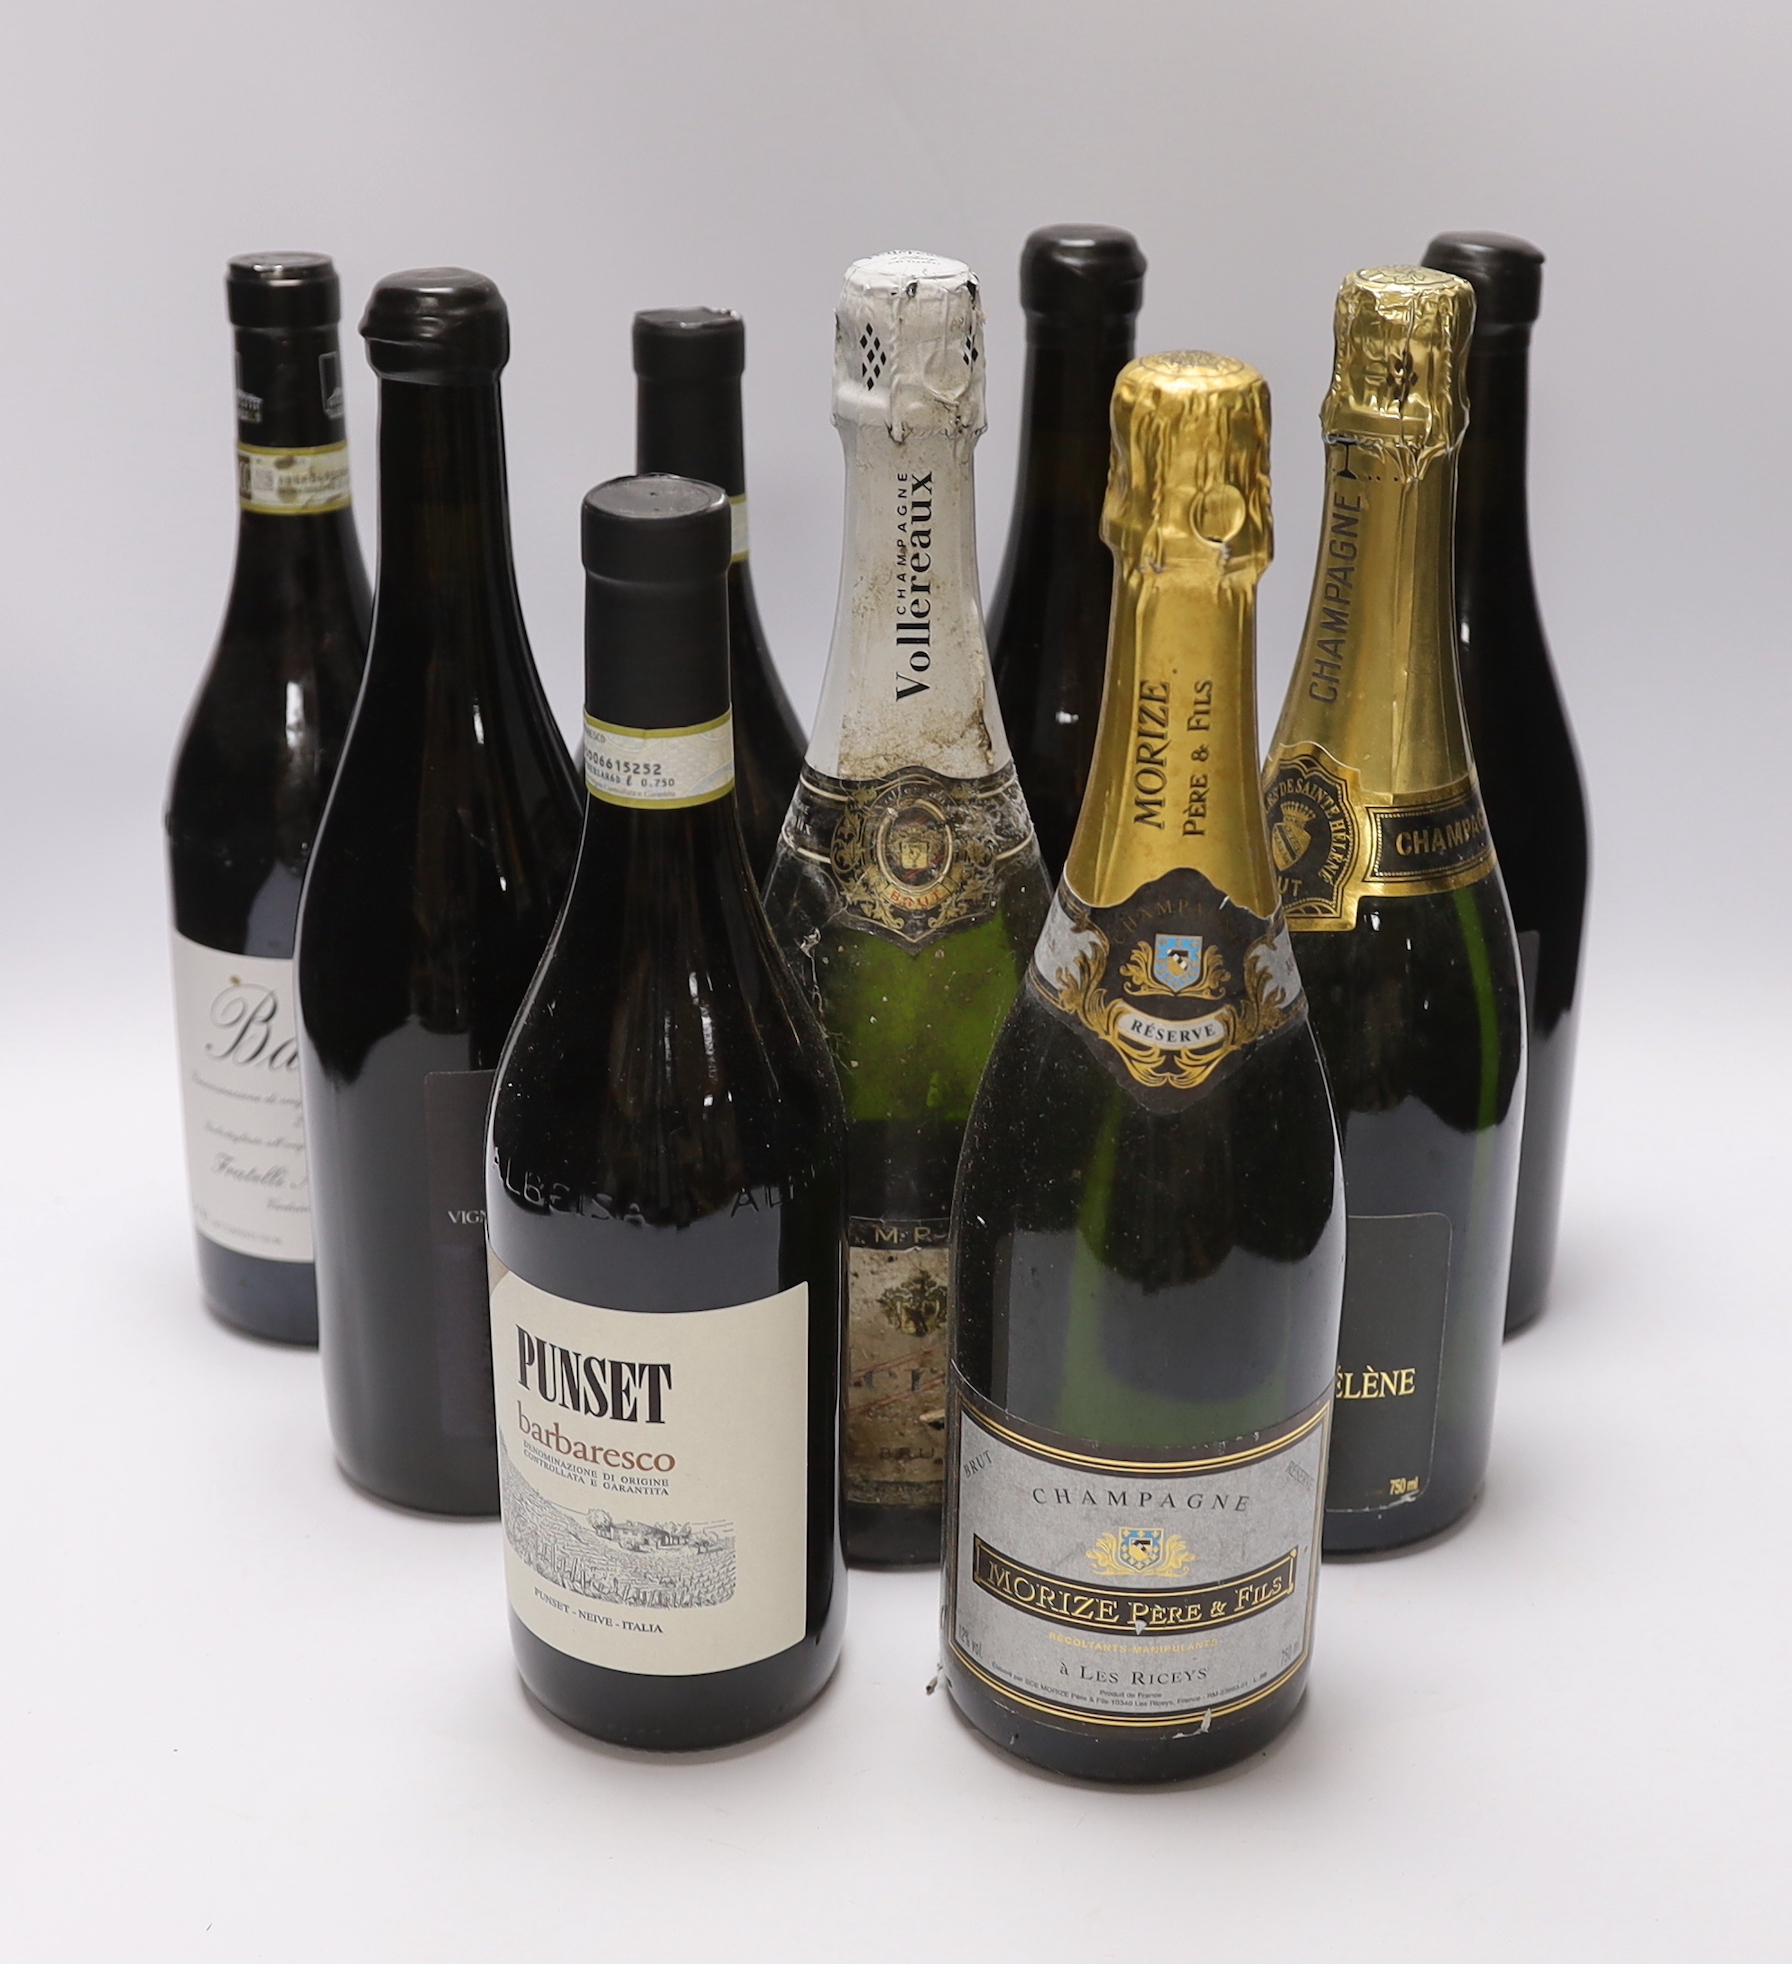 Six bottles of wine and three bottles of champagne including a bottle of 2014 Barolo, two bottles of Punset 2012 and three bottles of Vigny Corejo (Pinot)